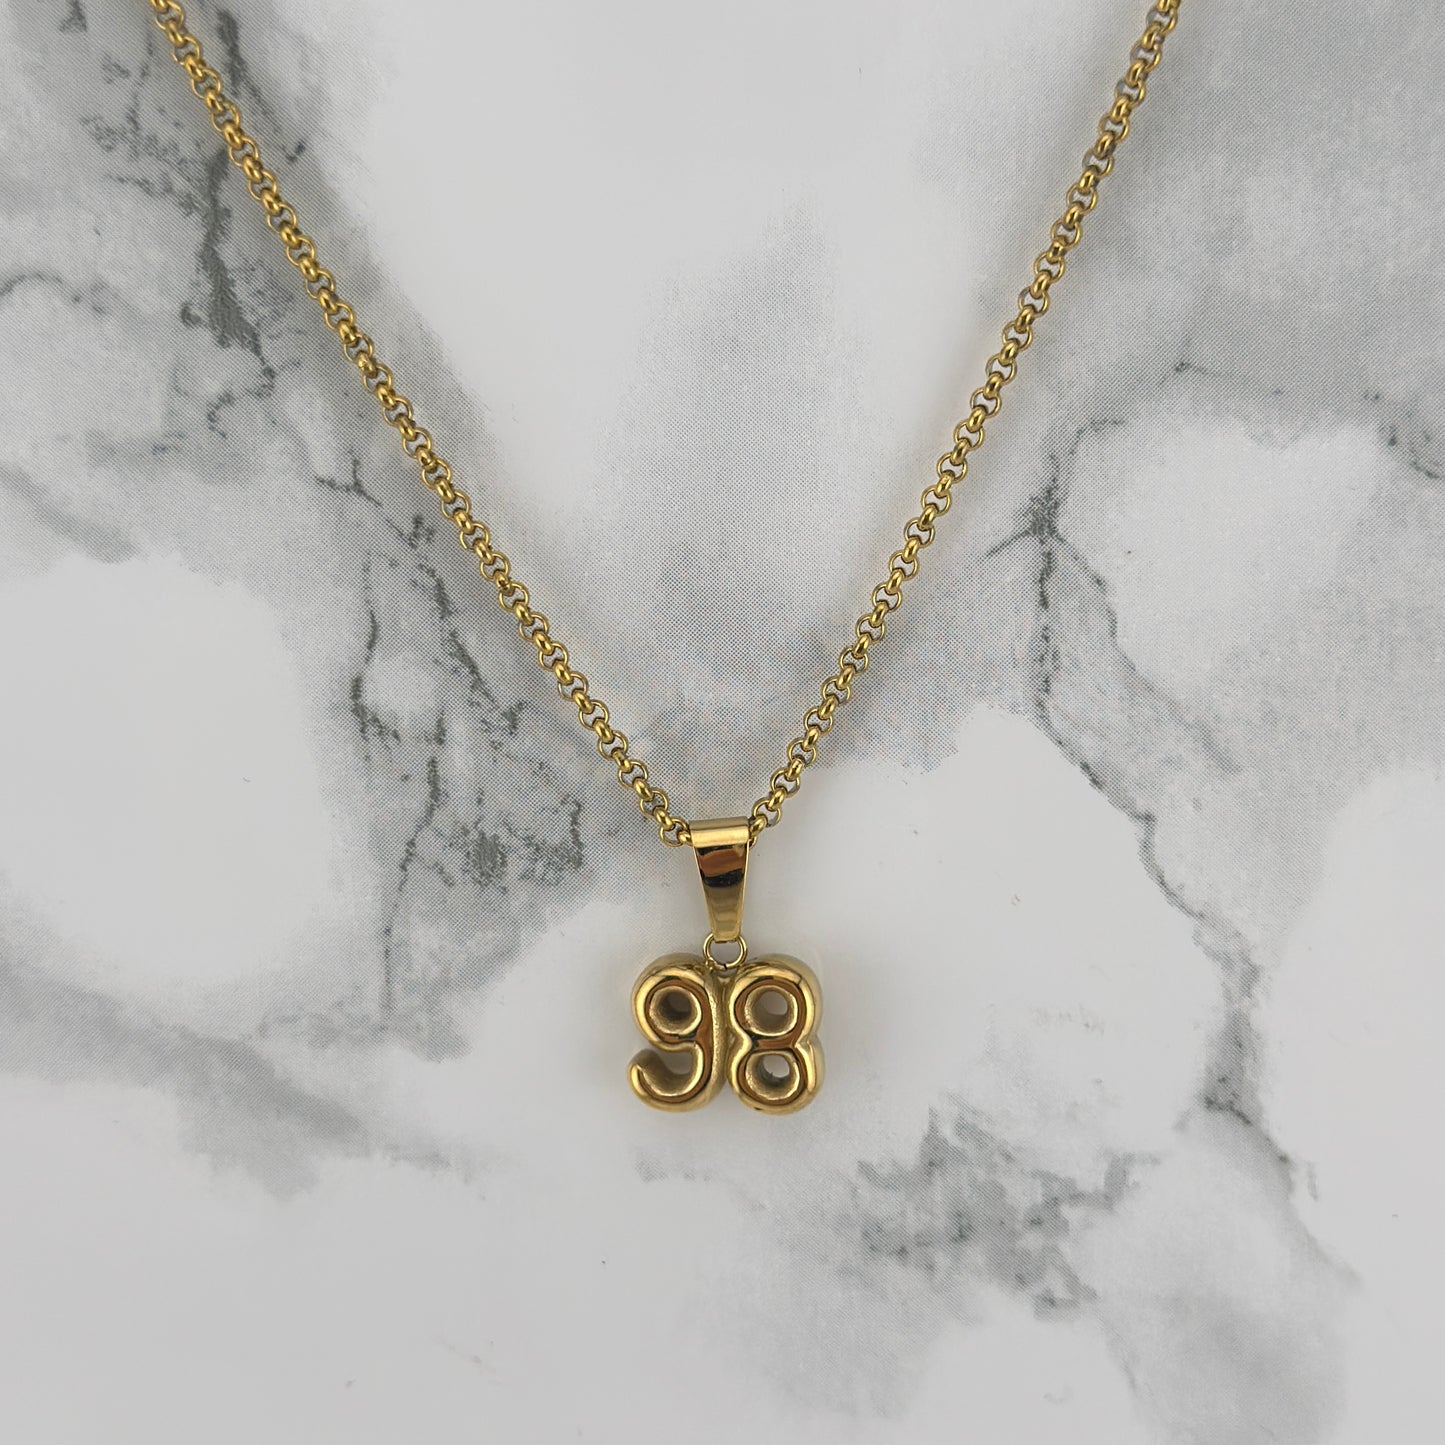 Nineties personalized Necklace